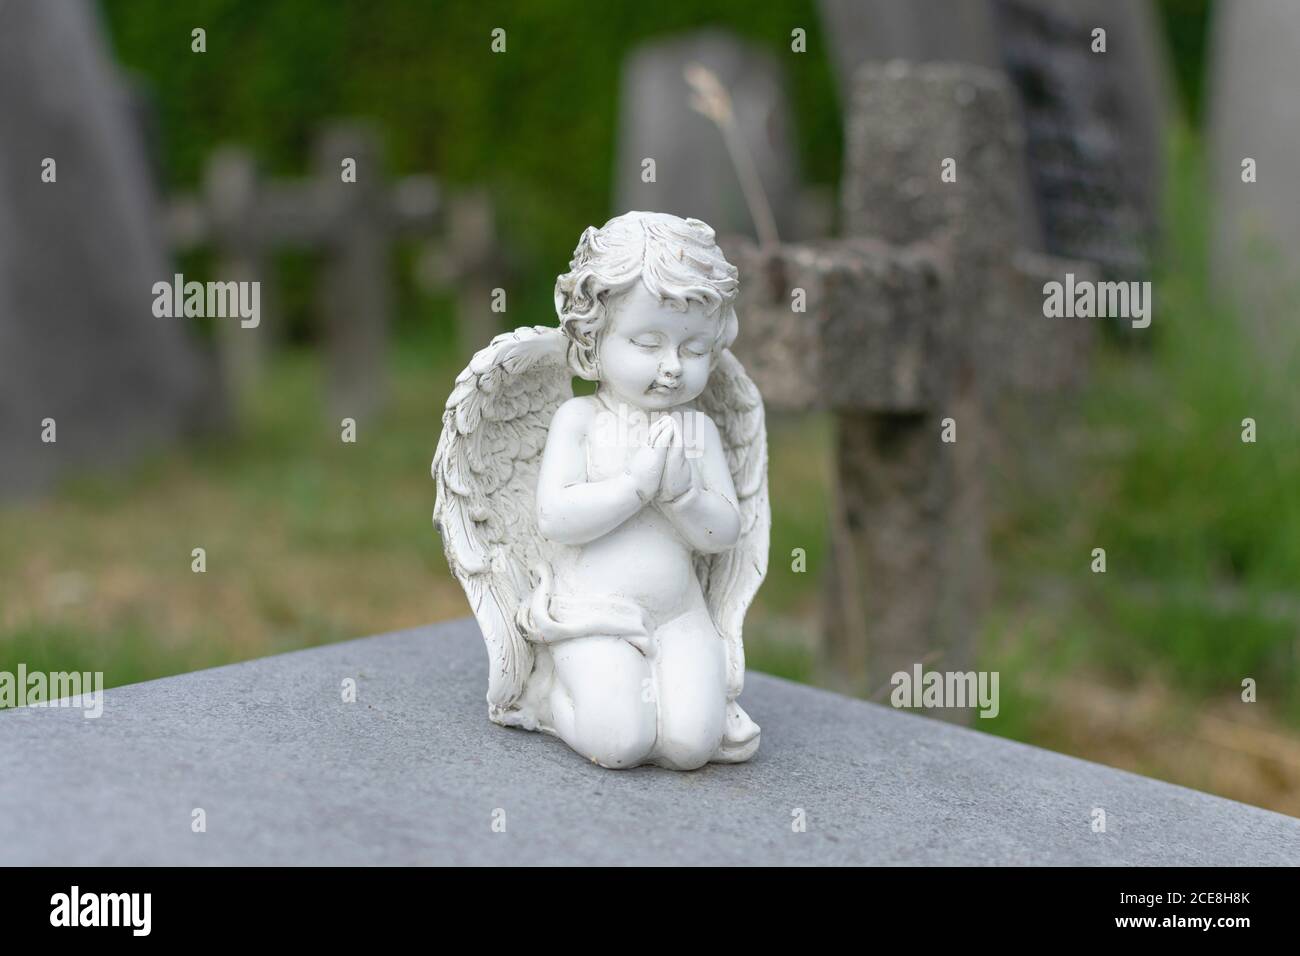 White stone statue of a praying angel in a cemetery with a blurred cross in the background Stock Photo